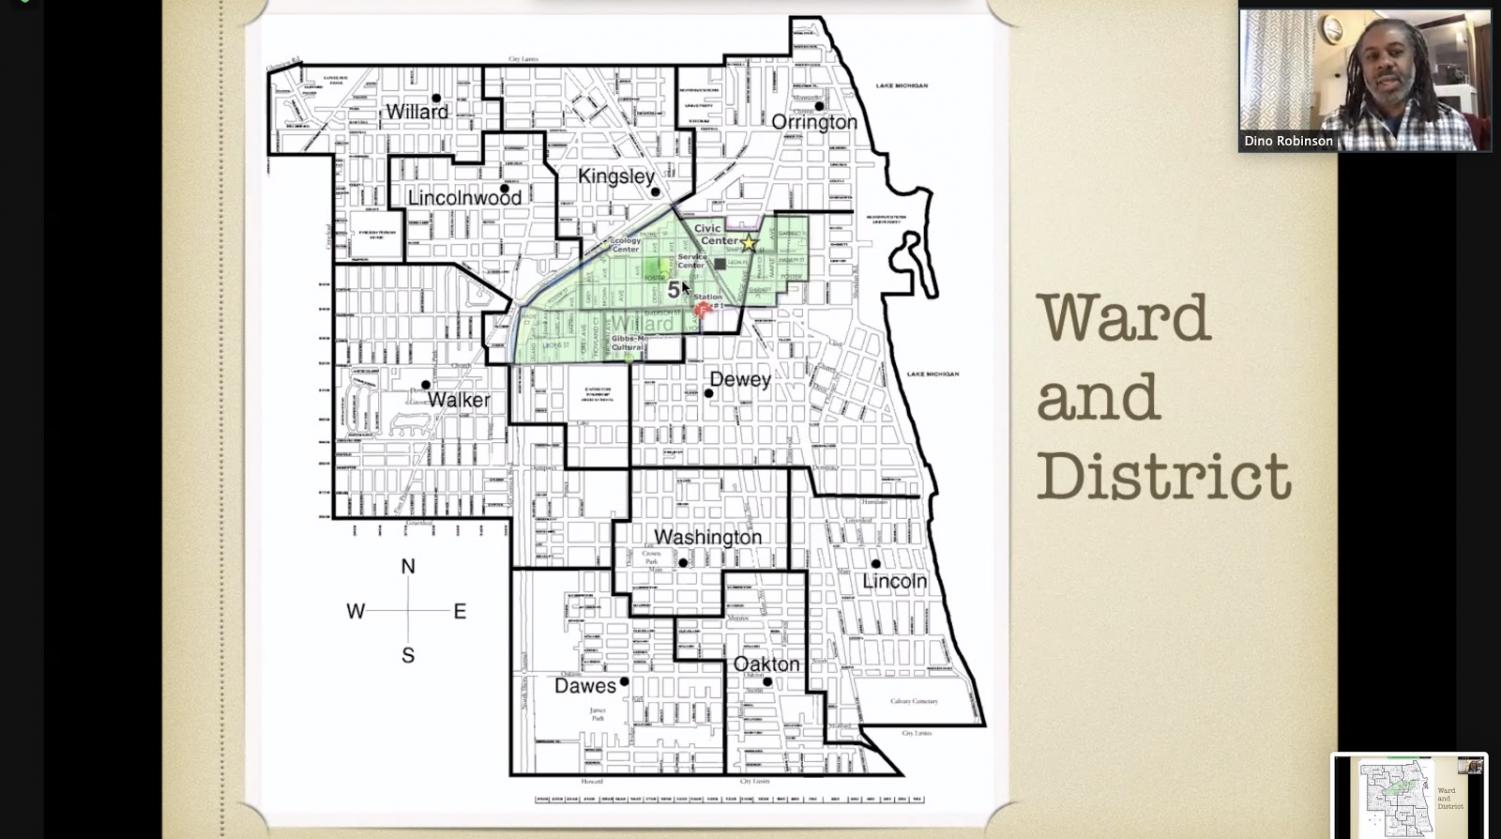 A+map+of+Evanston+showing+the+5th+ward+shared+on+a+Zoom+screen+with+Dino+Robinson+speaking+in+the+right+hand+corner.